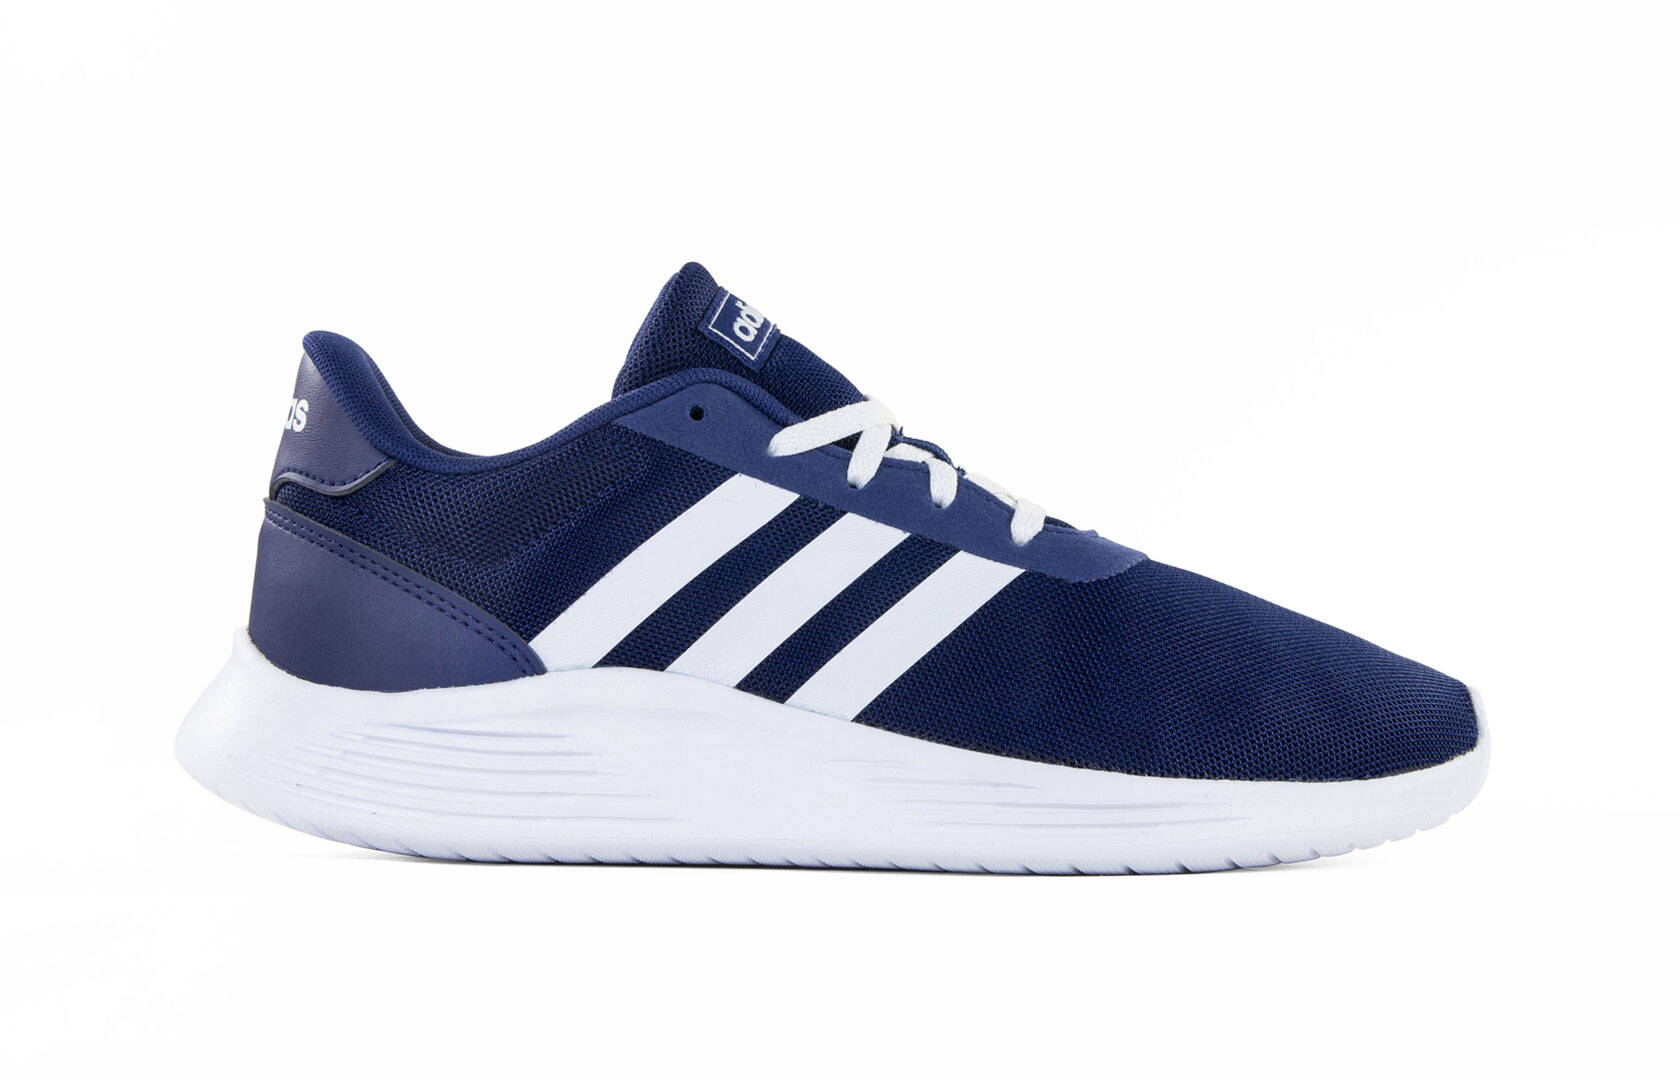 Adidas LITE RACER 2.0 K EH1425 youth shoes